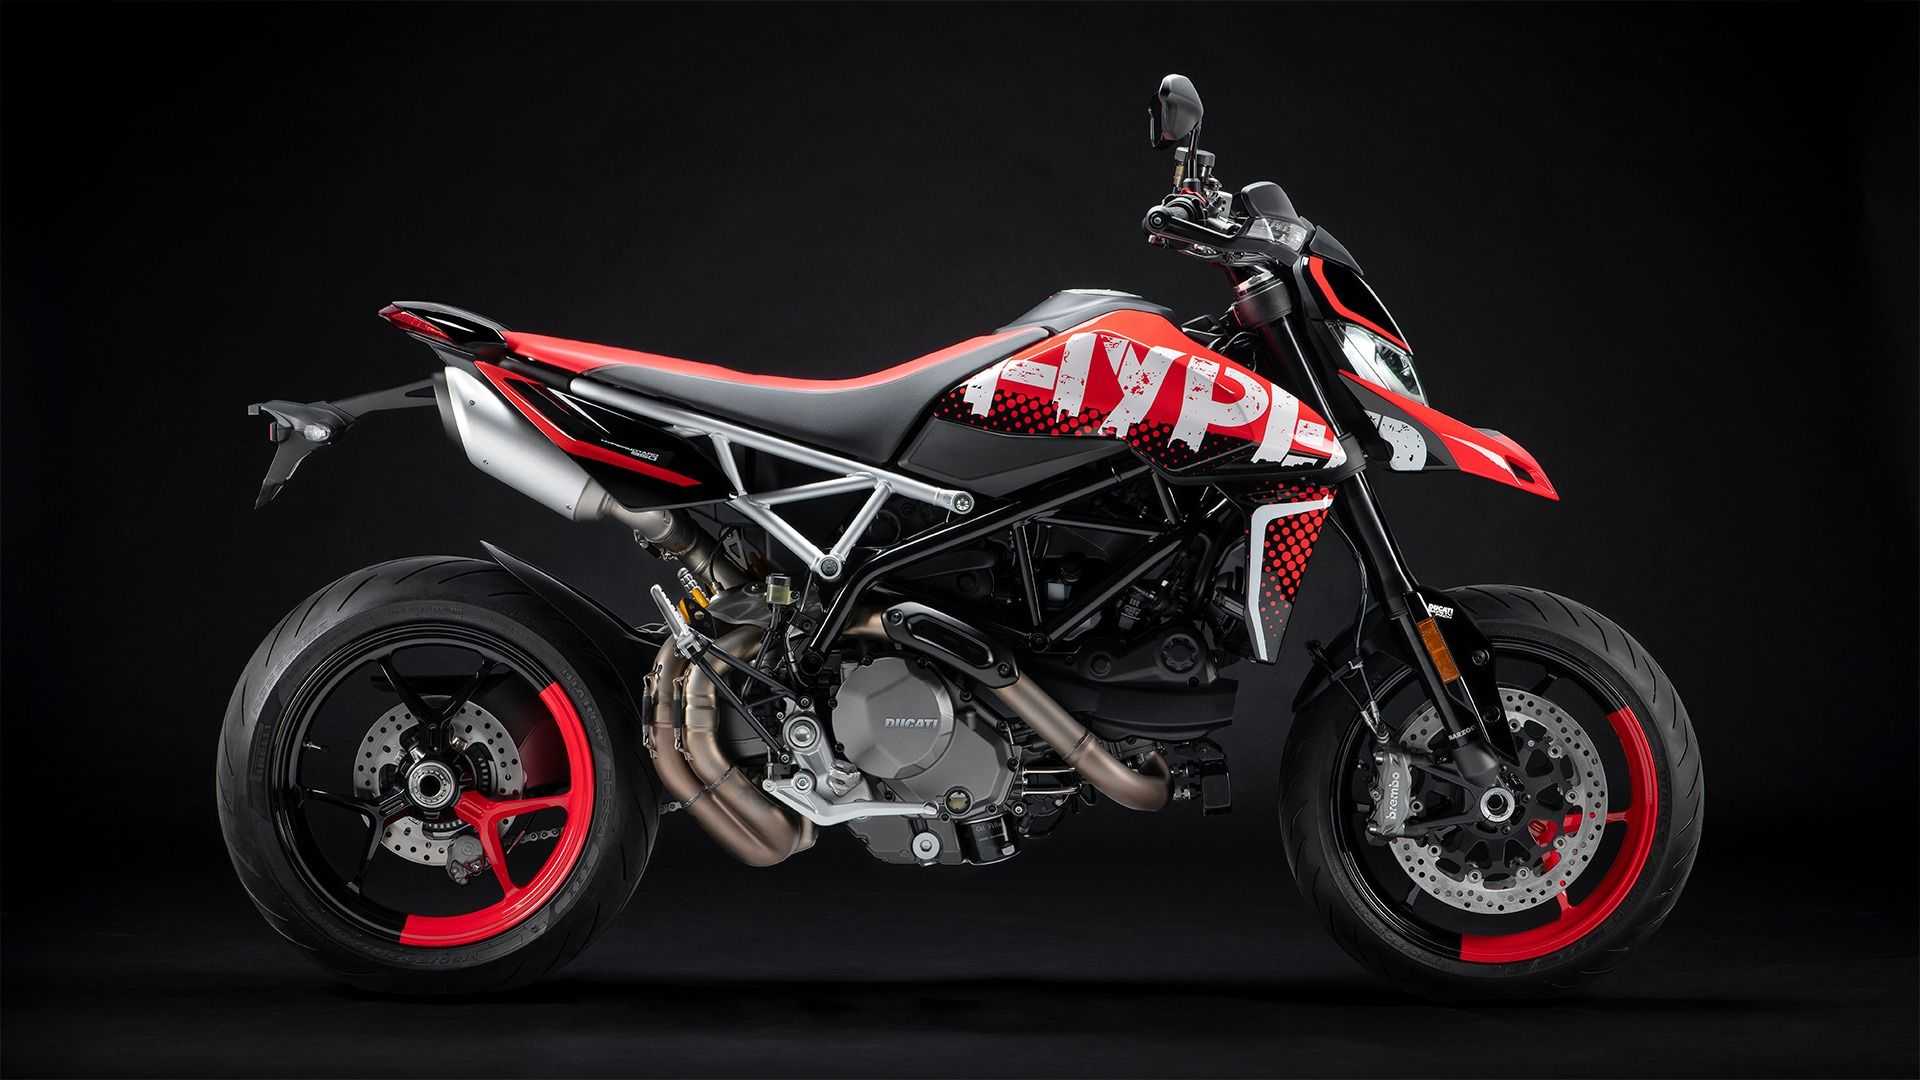 Did you fall in love with the Ducati Hypermotard 950 RVE's design but were unable to purchase one when it was first released? That's fine; in 2020, there was a lot going on. If one of your bikes has gotten away, we have some good news from Ducati North America for you. In 2022, a special second-generation Hypermotard 950 RVE will hit dealerships in the United States.  It does, however, include the magnificent Graffiti livery, which first debuted at the 2019 Concorso d'Eleganza Villa d'Este exhibition on the banks of beautiful Lake Como, Italy. Although it was simply an idea at the time, Centro Stile Ducati received a lot of positive feedback.  The design of the first-generation Hypermotard 950 RVE didn't alter much between idea and its release in 2020. This was greatly appreciated by fans, as it is not often that concepts make it into production without incident.  The second-generation Ducati Hypermotard 950 RVE sits between the standard Hypermotard 950 and the 950 SP once more. It's driven by a 937cc Testastretta engine that produces 114 horsepower at 9,000 rpm and 71 pound-feet of torque at 7,250 rpm, according to the manufacturer. Around 80% of the 950's torque is available between 3,000 and 9,500 rpm, according to Ducati, making it exceedingly easy and entertaining to tap into when riding.  A fully adjustable 45mm Marzocchi fork and Sachs monoshock setup handle the suspension duties. Braking responsibilities are shared between a pair of Brembo M4.32 four-piston radial monoblock callipers up front (with 320mm brake discs) and a single two-piston Brembo calliper in the back (with a 245mm disc). The second-generation Hypermotard 950 RVE has traction control, wheelie control, Bosch cornering ABS, and an up/down quickshifter to make your riding life easier.  But let's get back to the Graffiti livery. It's lovely, but it's also a time-consuming procedure to manufacture, which is why Ducati claims only 100 more will be made.  To get everything to look right, layers of extremely thin decals must be put in stages, with the required methods followed and time regulated. However, the ultimate effect appears to be well worth the effort.  If you're eager to get your hands on one, the second-generation Hypermotard 950 RVE will be available in late May 2022 in the United States. The MSRP will be $15,695, and pre-sold orders will be the only way to get one. So, if you want one, you should contact your local Ducati dealer as soon as possible.